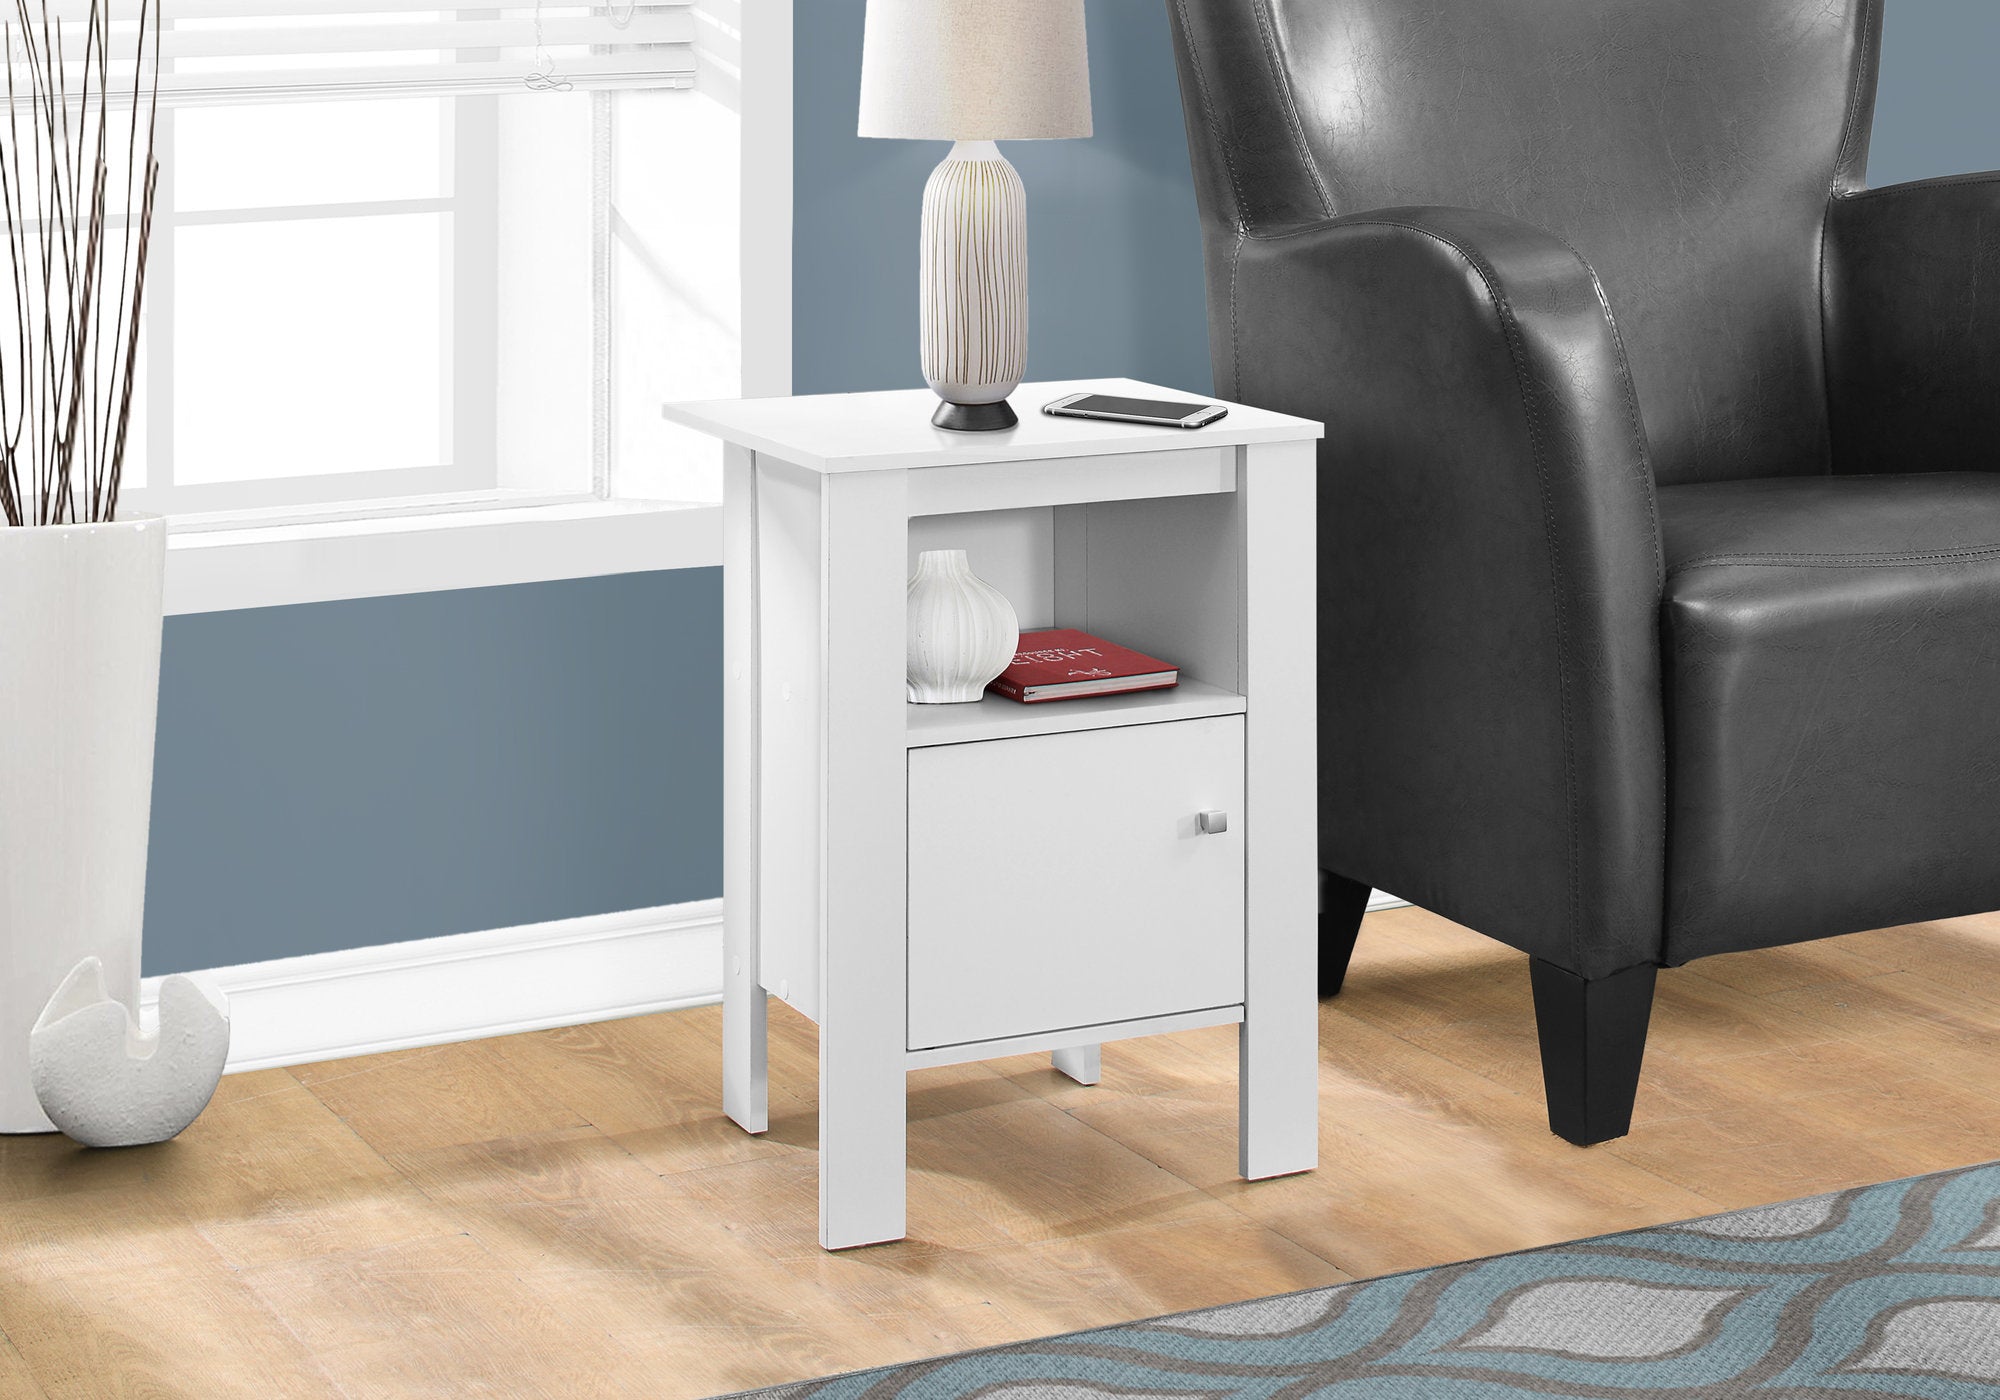 MN-192137    Accent Table, Side, End, Nightstand, Lamp, Living Room, Bedroom, Laminate, White, White, Contemporary, Modern